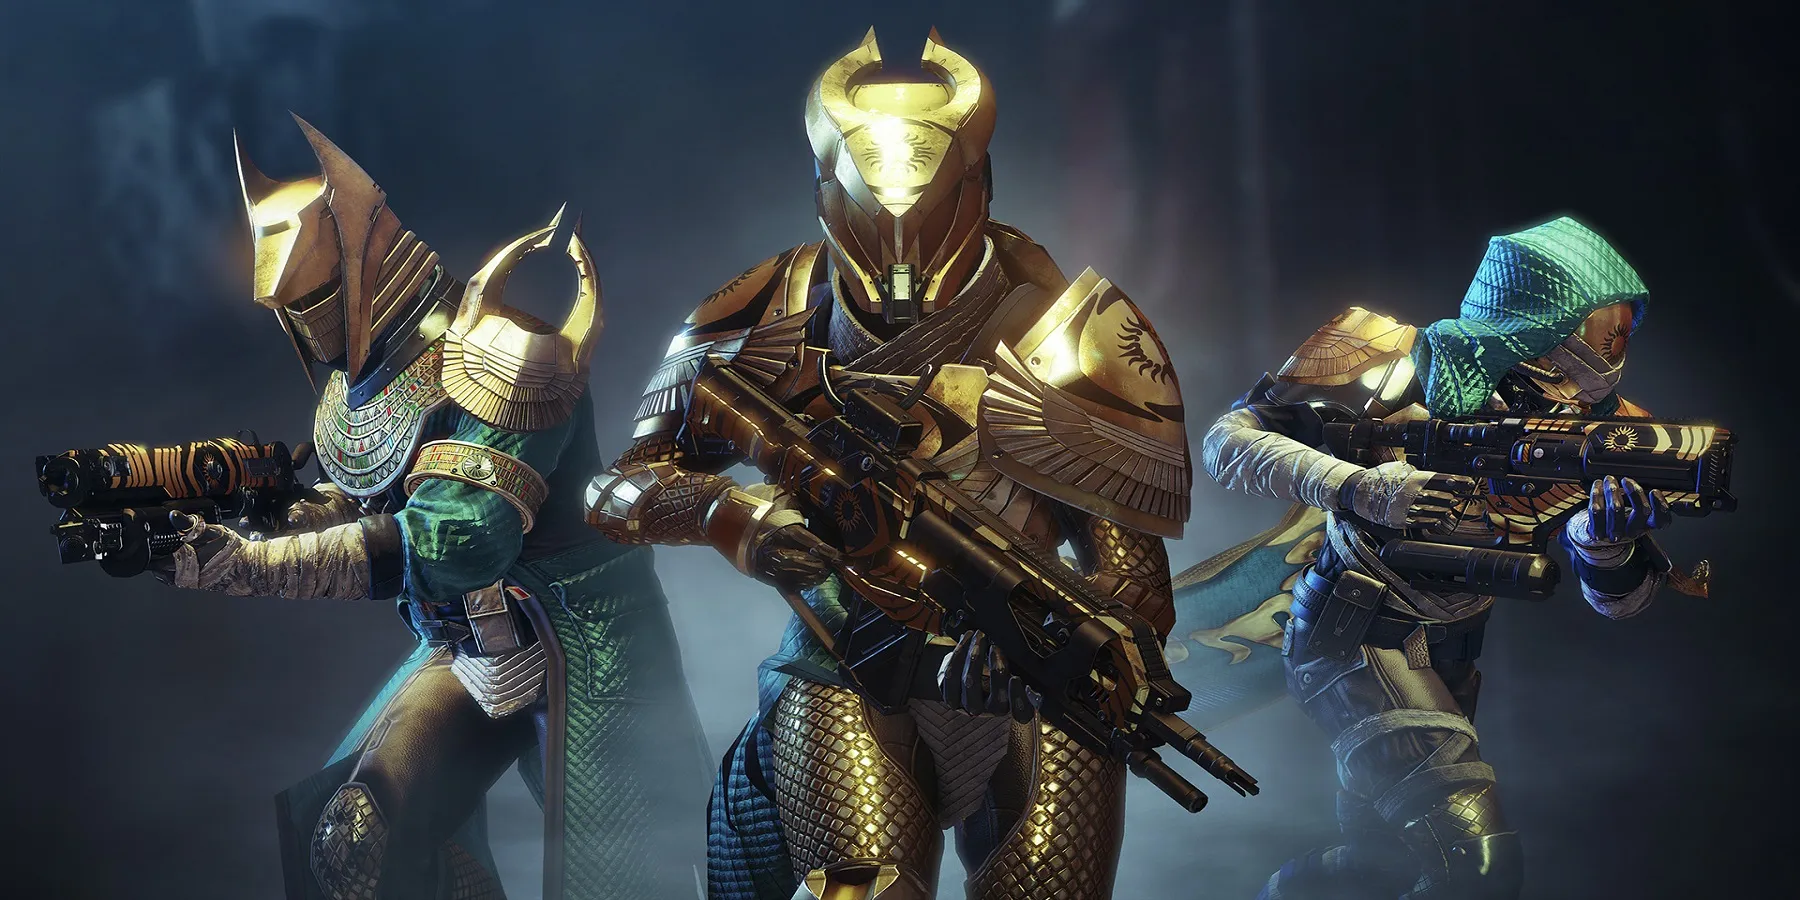 A new Strand grenade launcher is available for Destiny 2 players to earn in Trials of Osiris.